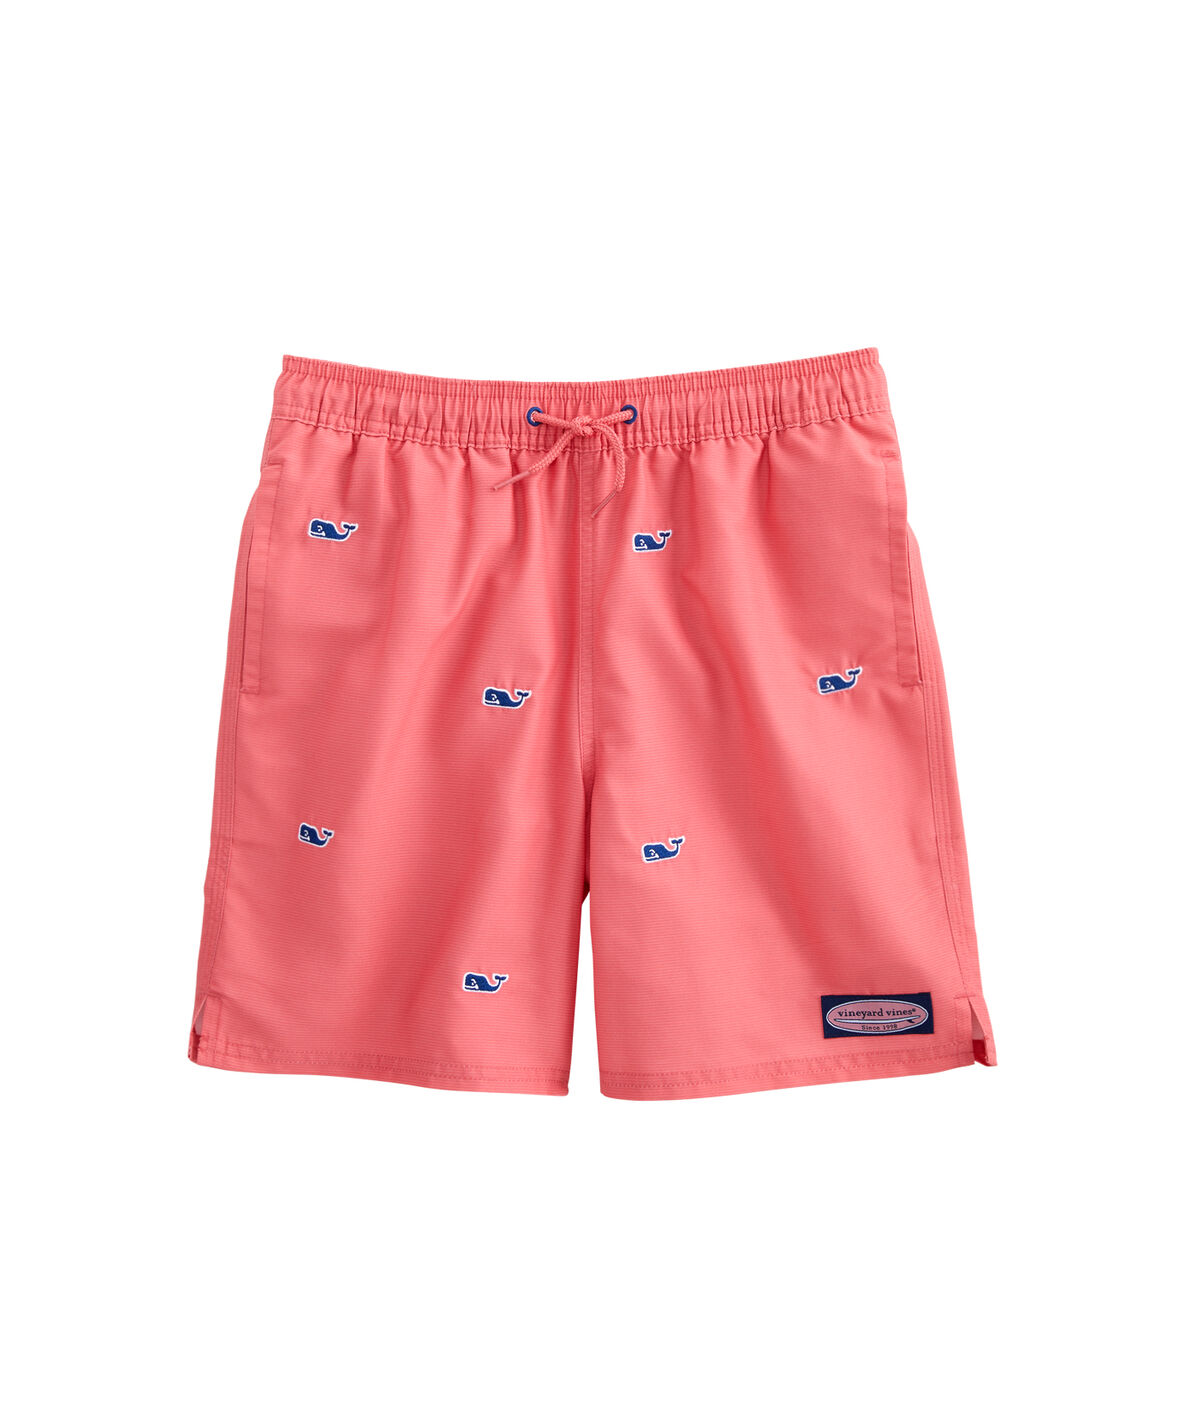 Shop Boys Whale Embroidered Fine Stripe Chappy Trunks at vineyard vines